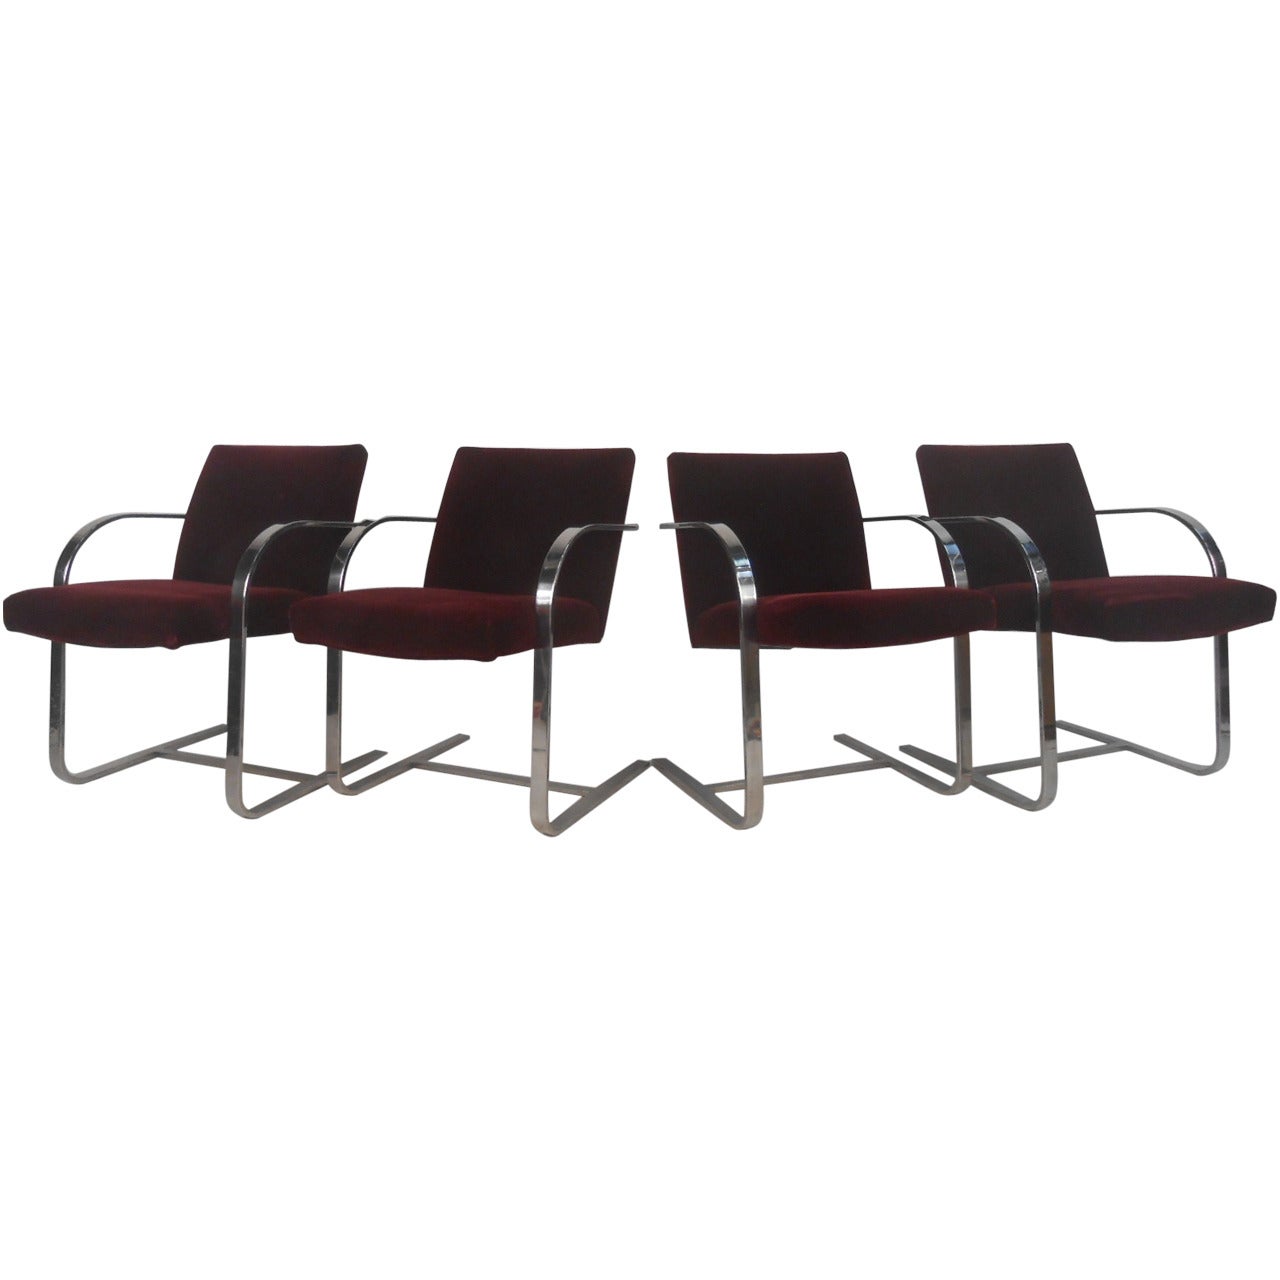 Vintage Modern Chrome Frame Cantilever Dining Chairs